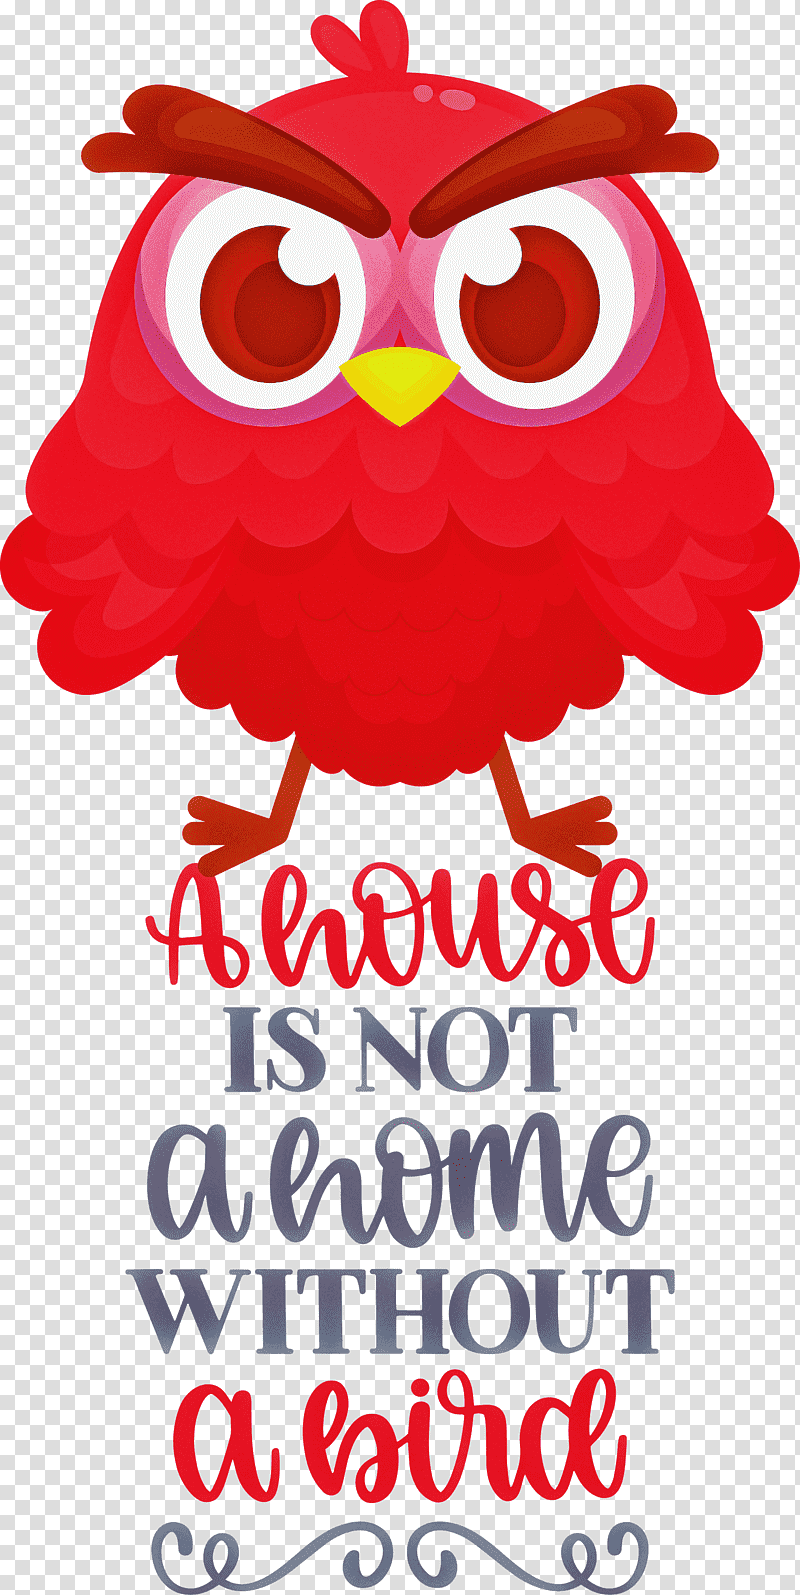 Bird Quote Bird Home, House, Birds, Eastern Screech Owl, Snowy Owl, Great Horned Owl, Owls transparent background PNG clipart